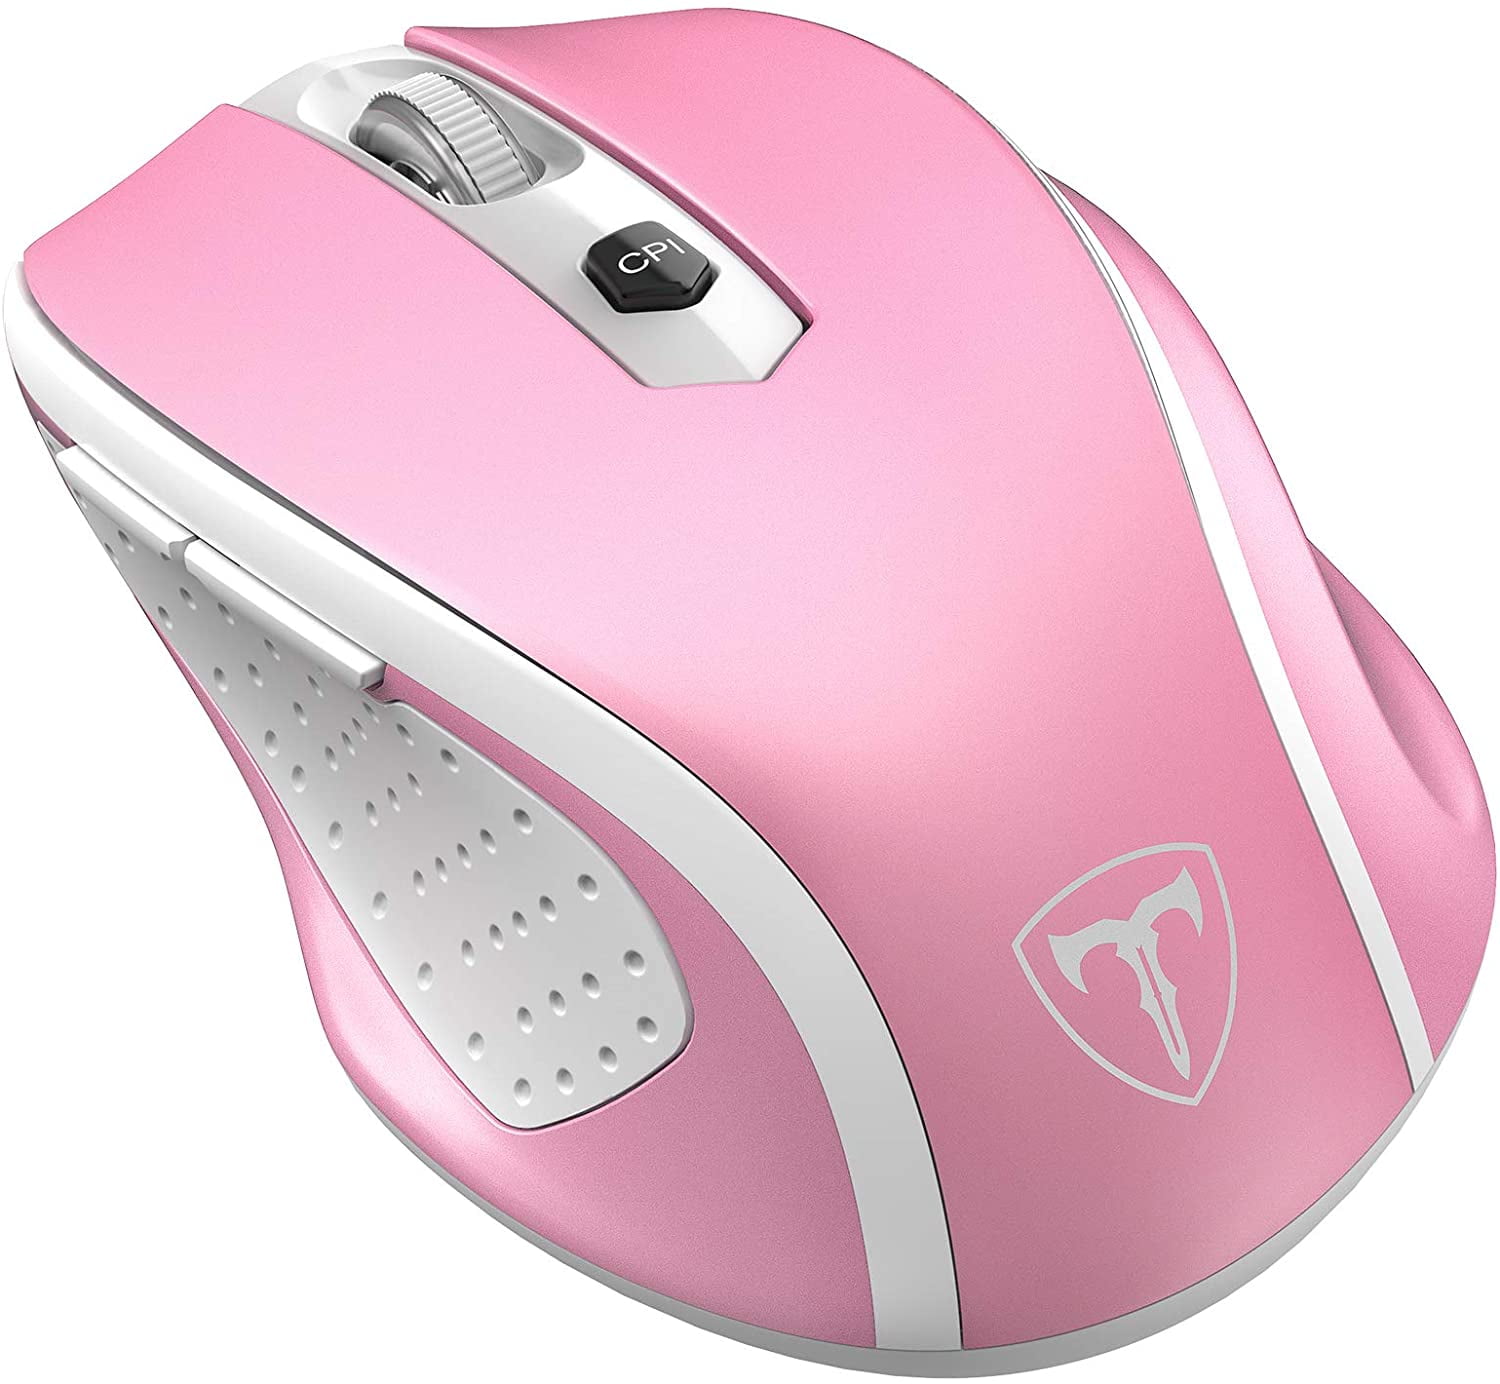 5 Adjustable DPI Levels MacBook VicTsing MM057 2.4G Wireless Portable Mobile Mouse Optical Mice with USB Receiver Pink Laptop 6 Buttons for Notebook Computer PC